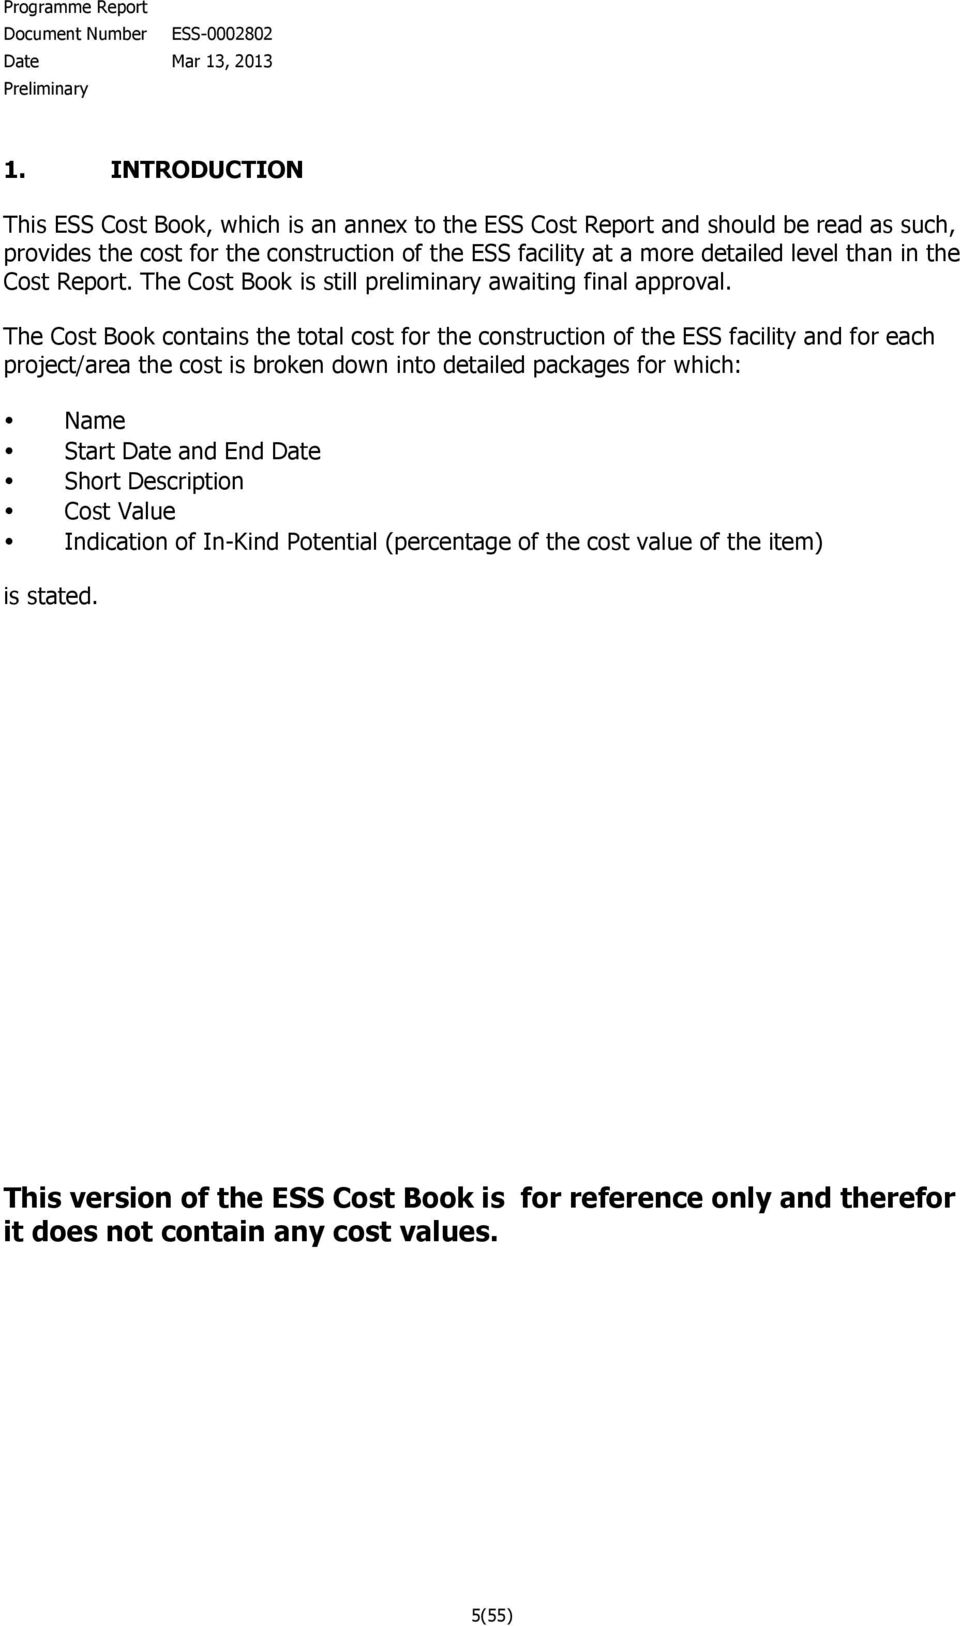 The Cost Book contains the total cost for the construction of the ESS facility and for each project/area the cost is broken down into detailed packages for which: Name